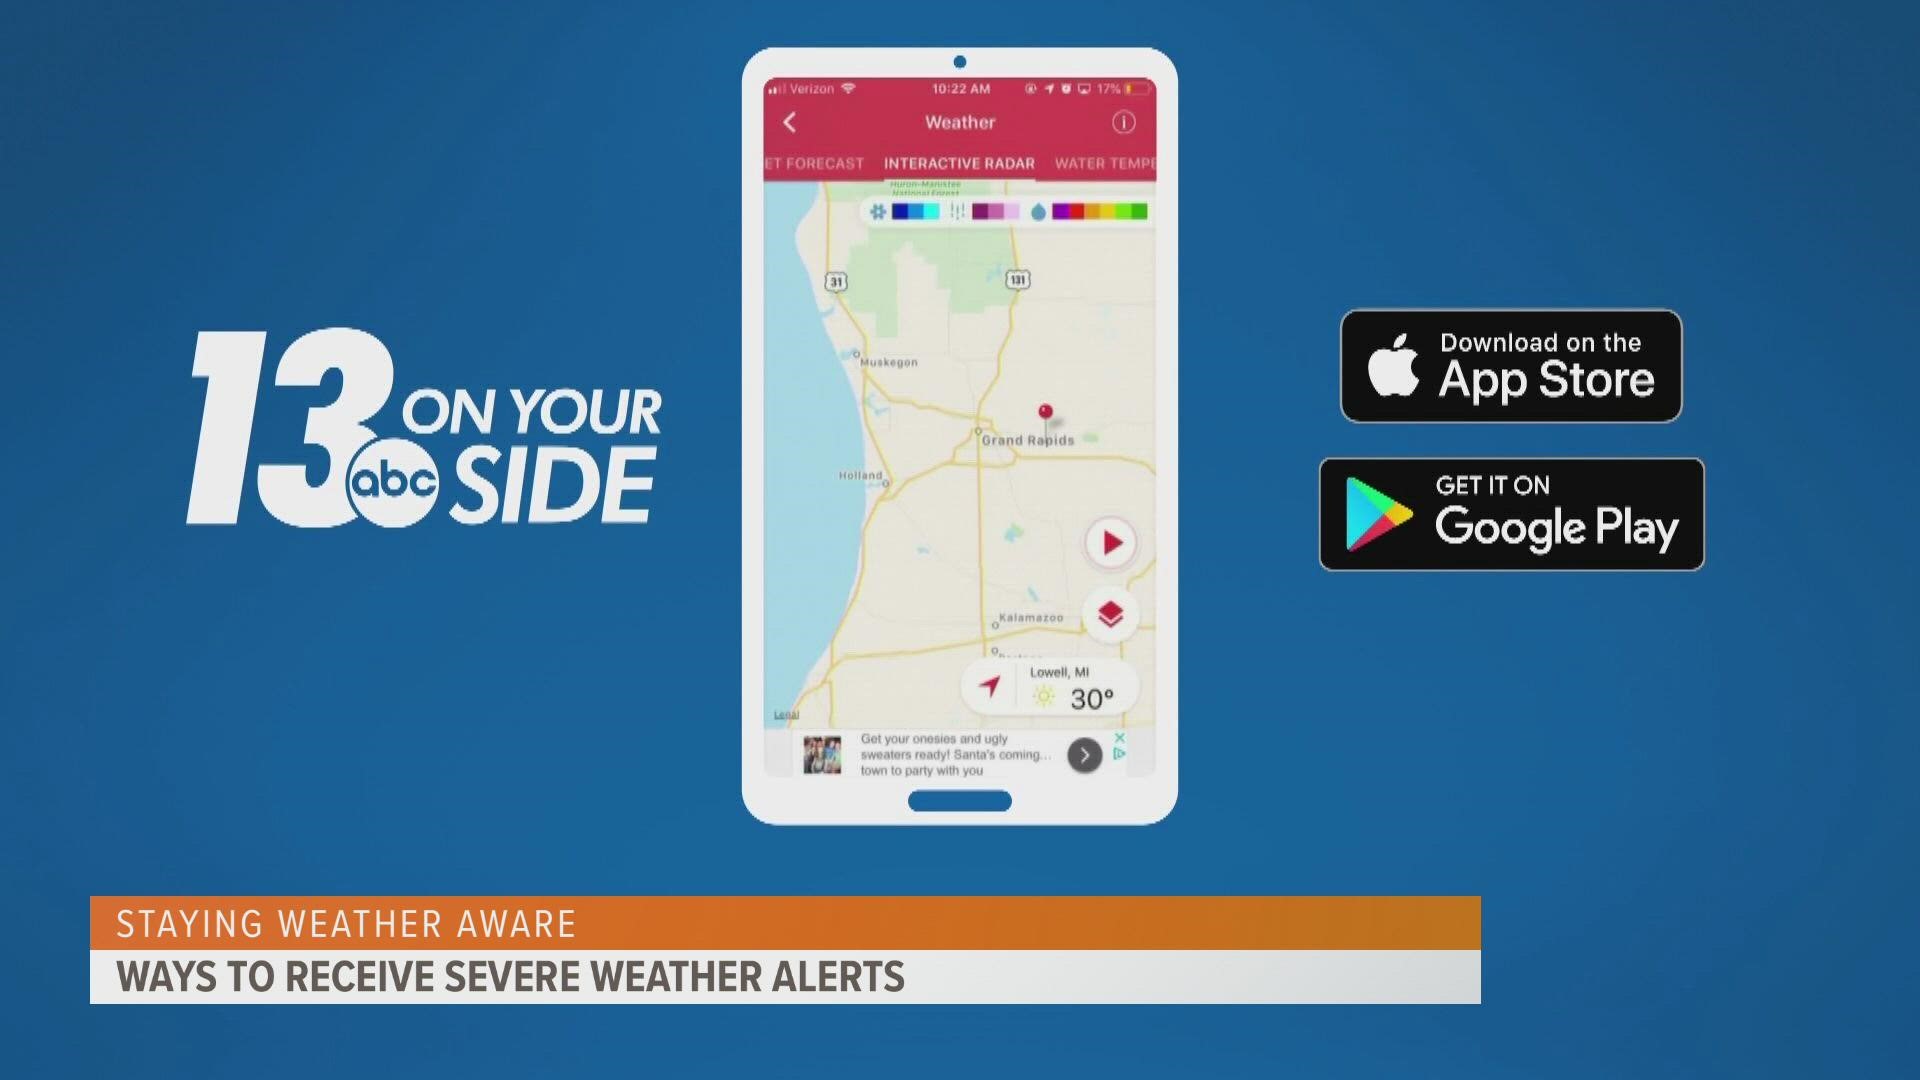 It's critical you have multiple ways to receive severe weather alerts.